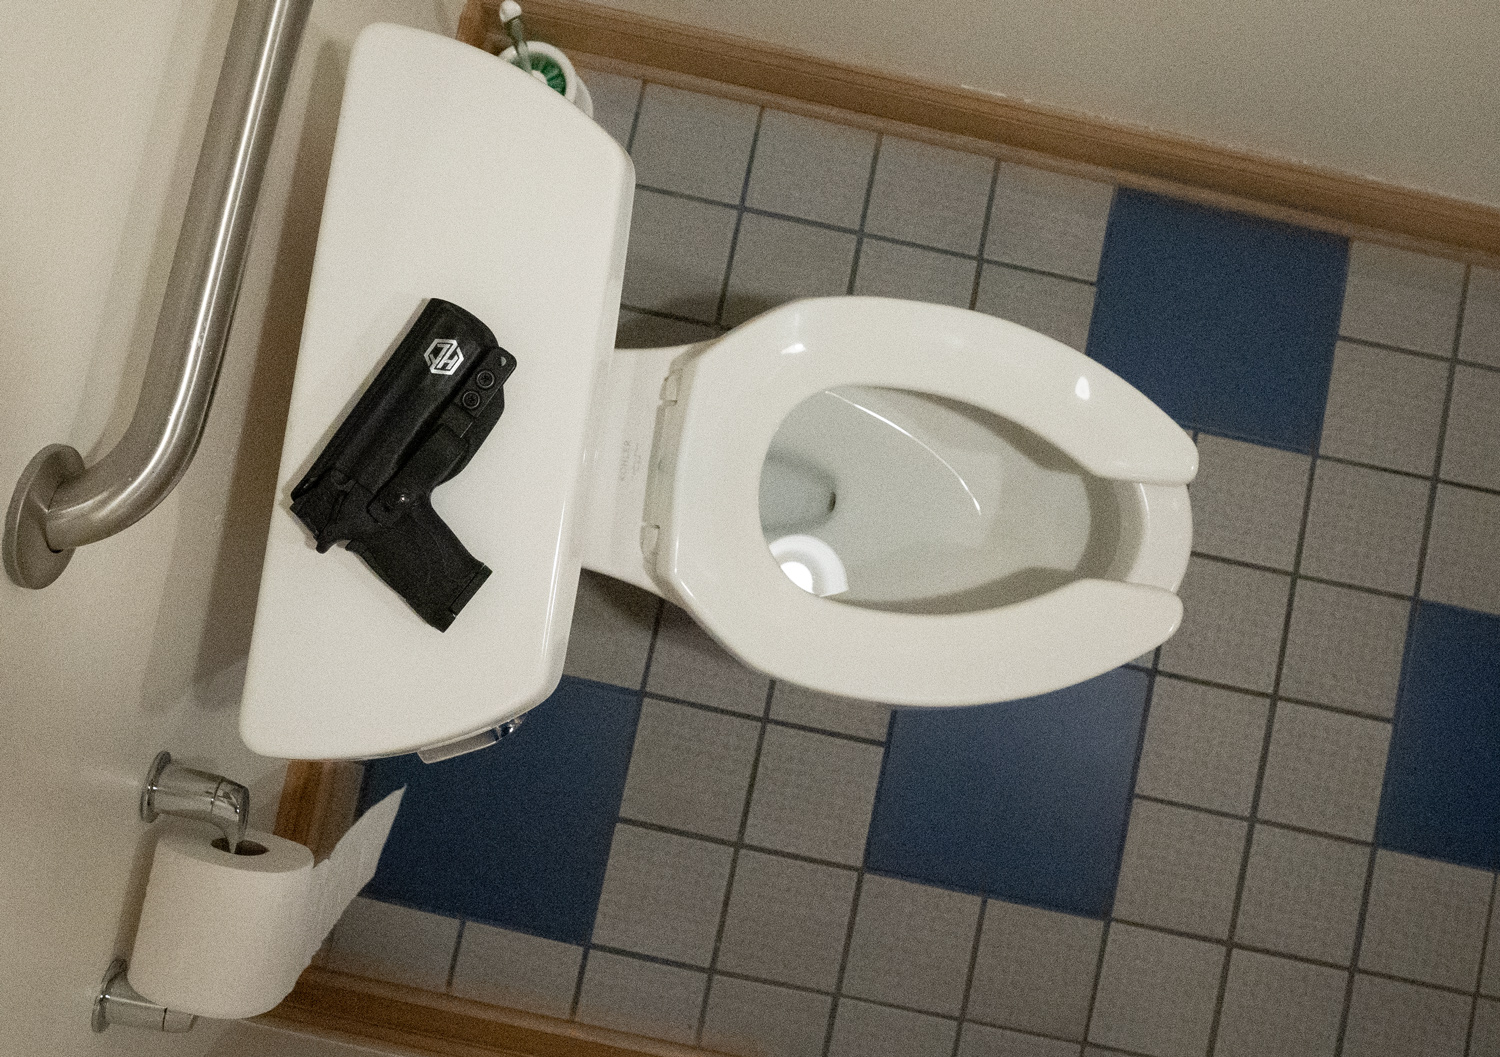 Pistol left on top of a toilet in a restroom.